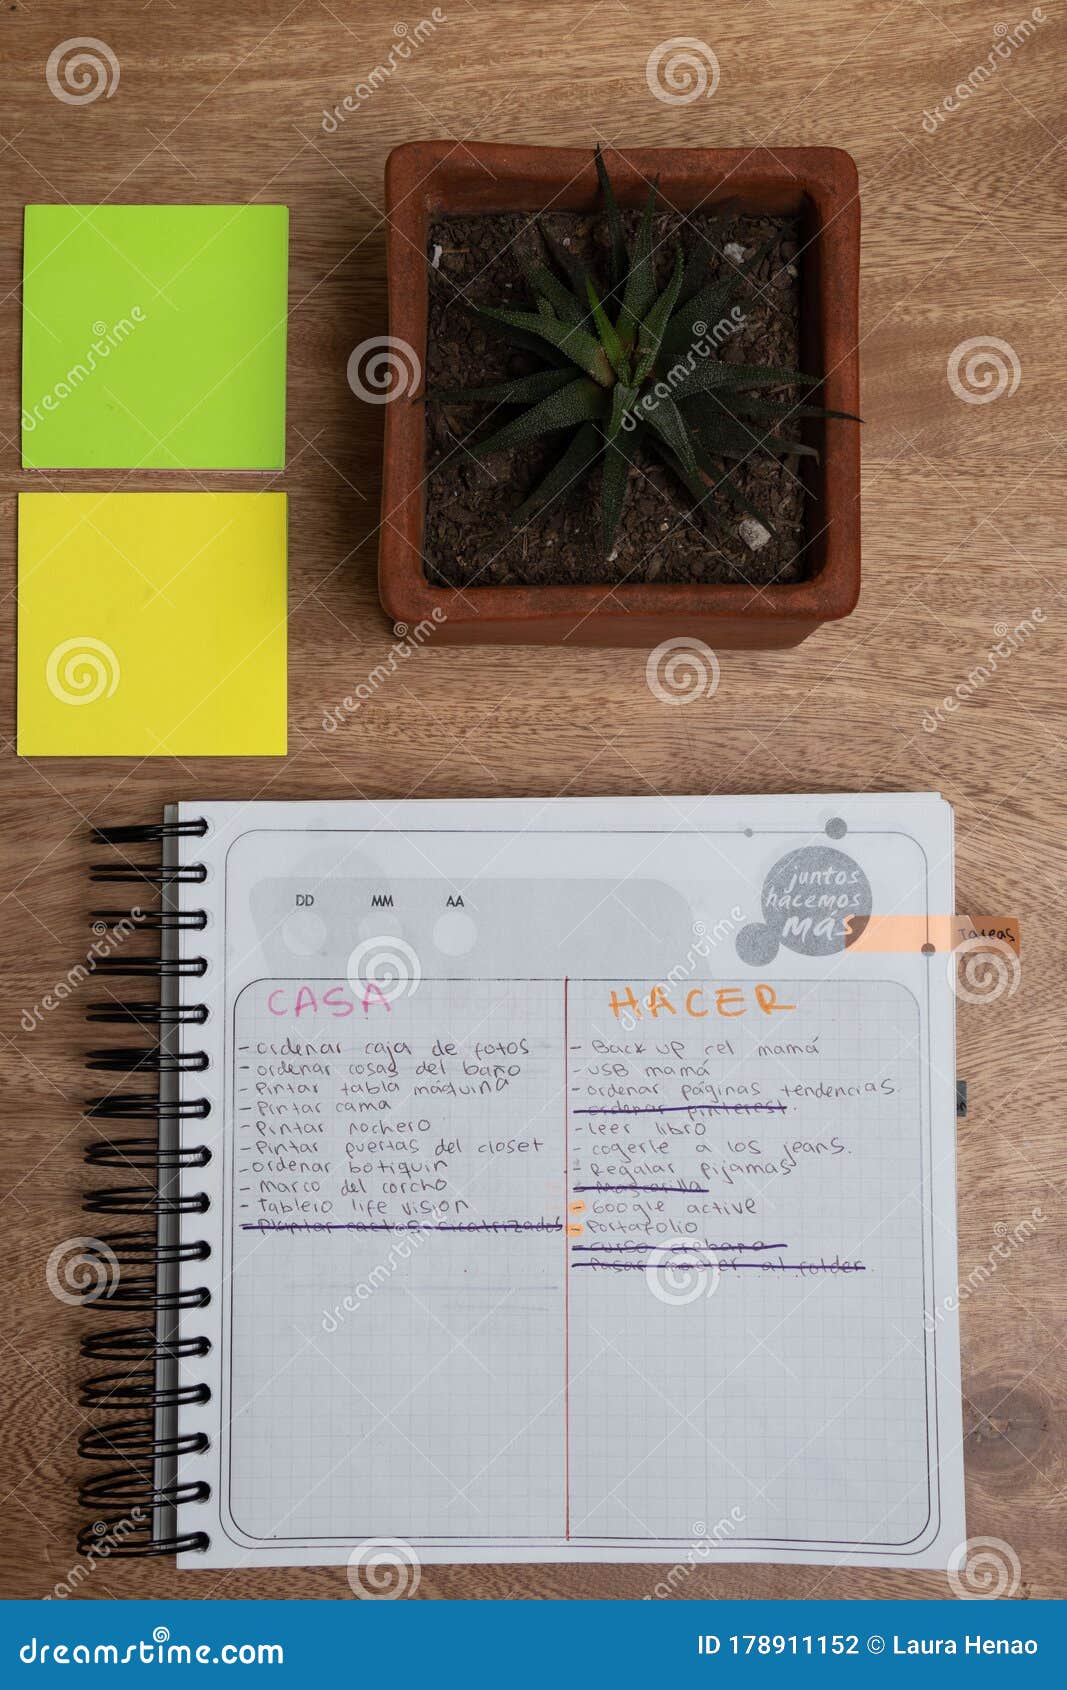 desk with stationery and list of things to do with spanish text